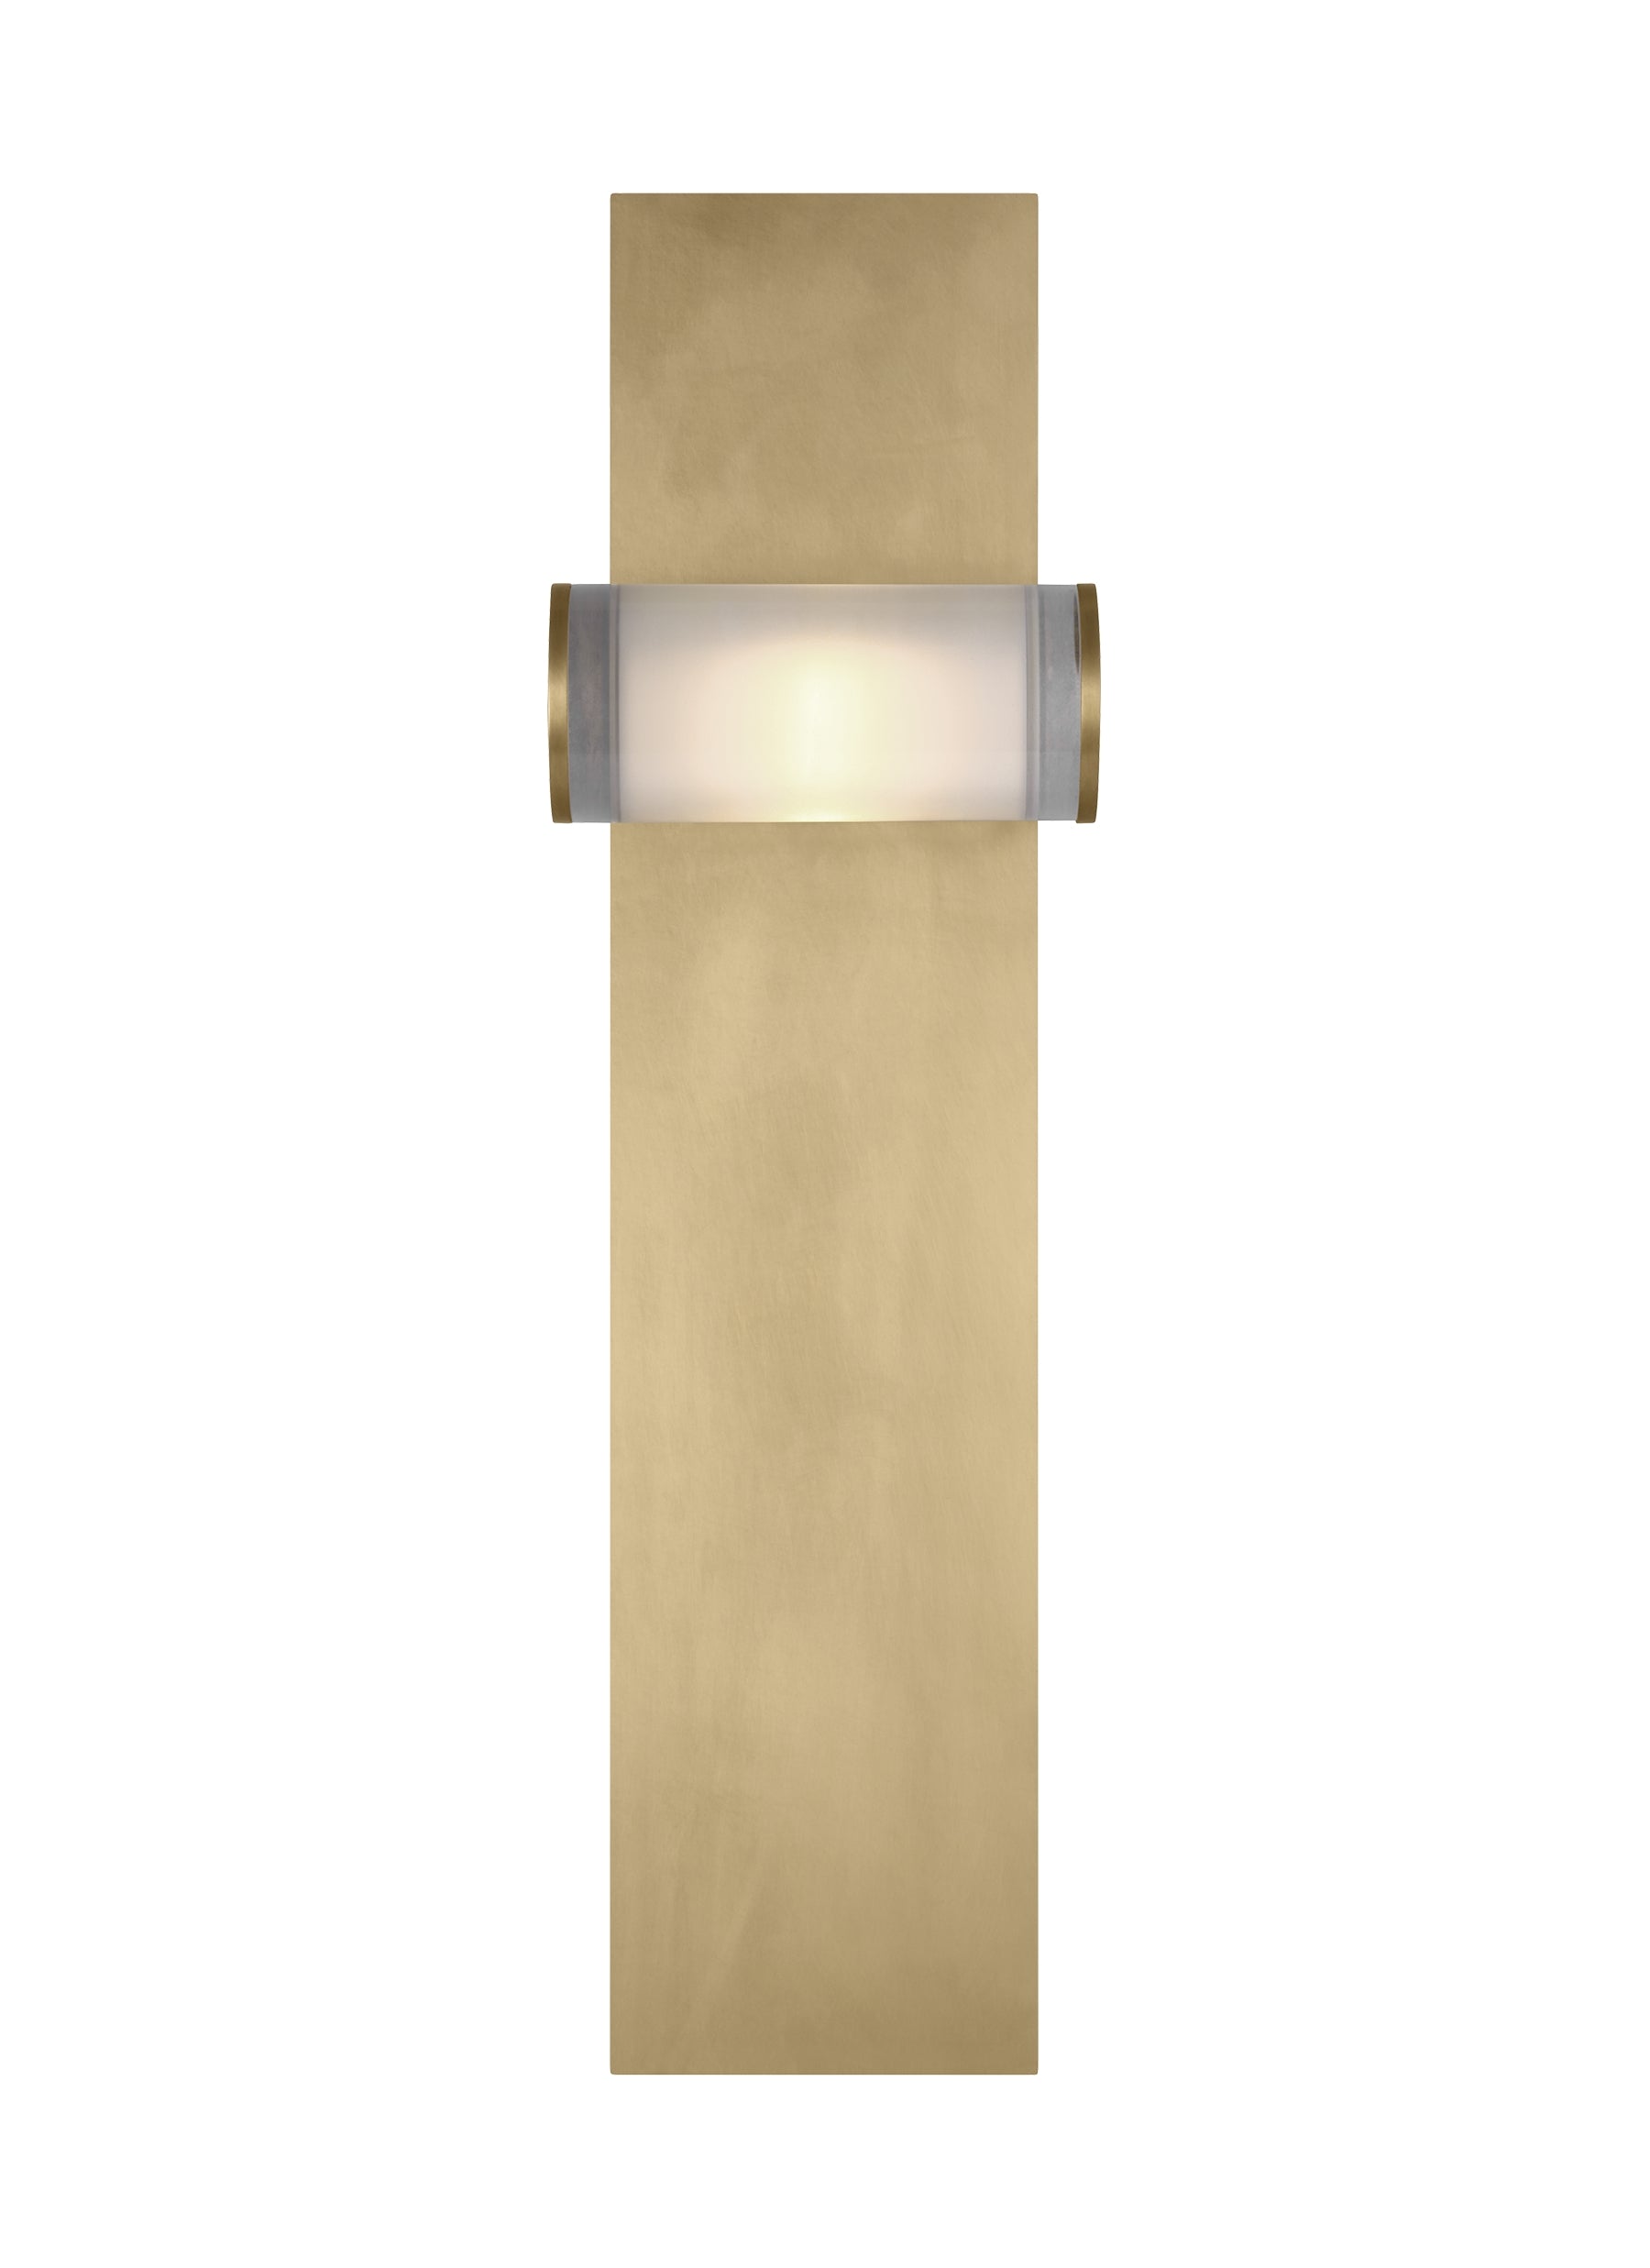 Esfera Wall Sconce | Commercial LED lighting